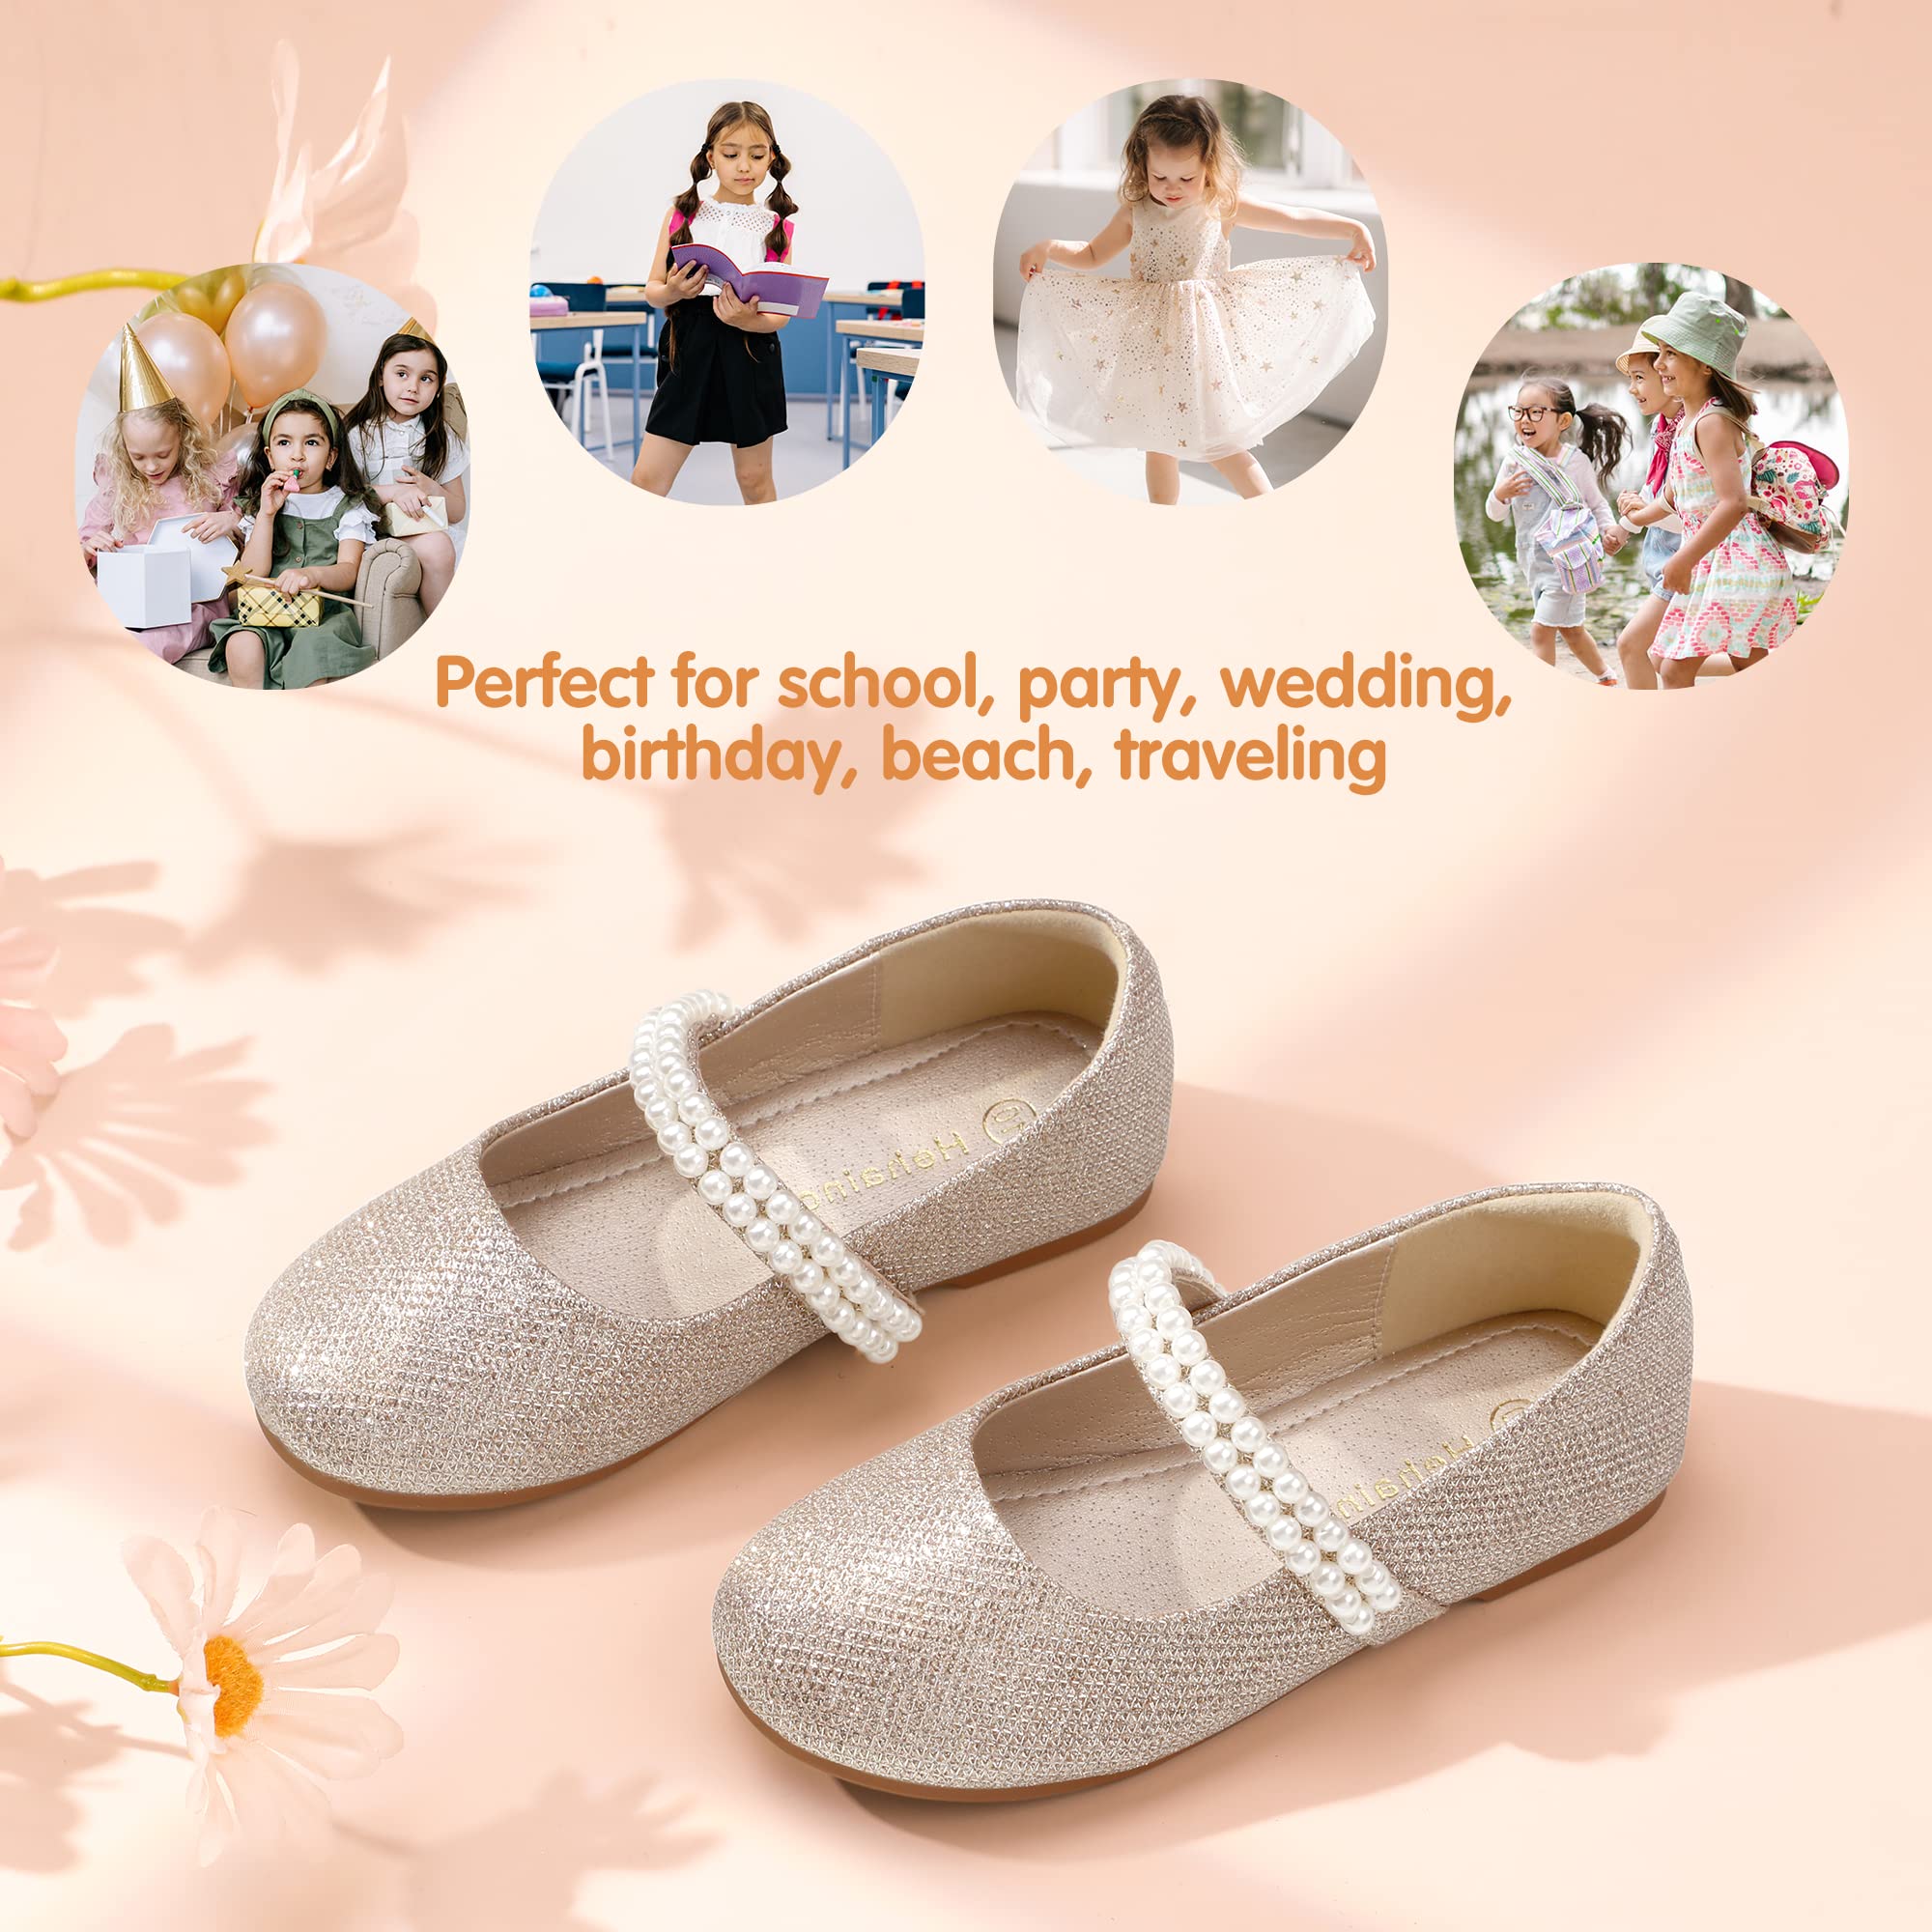 Hehainom Toddler Flower Girls Dress Shoes, Mary Jane Princess Ballet Flats with Bow and Peals for Party School